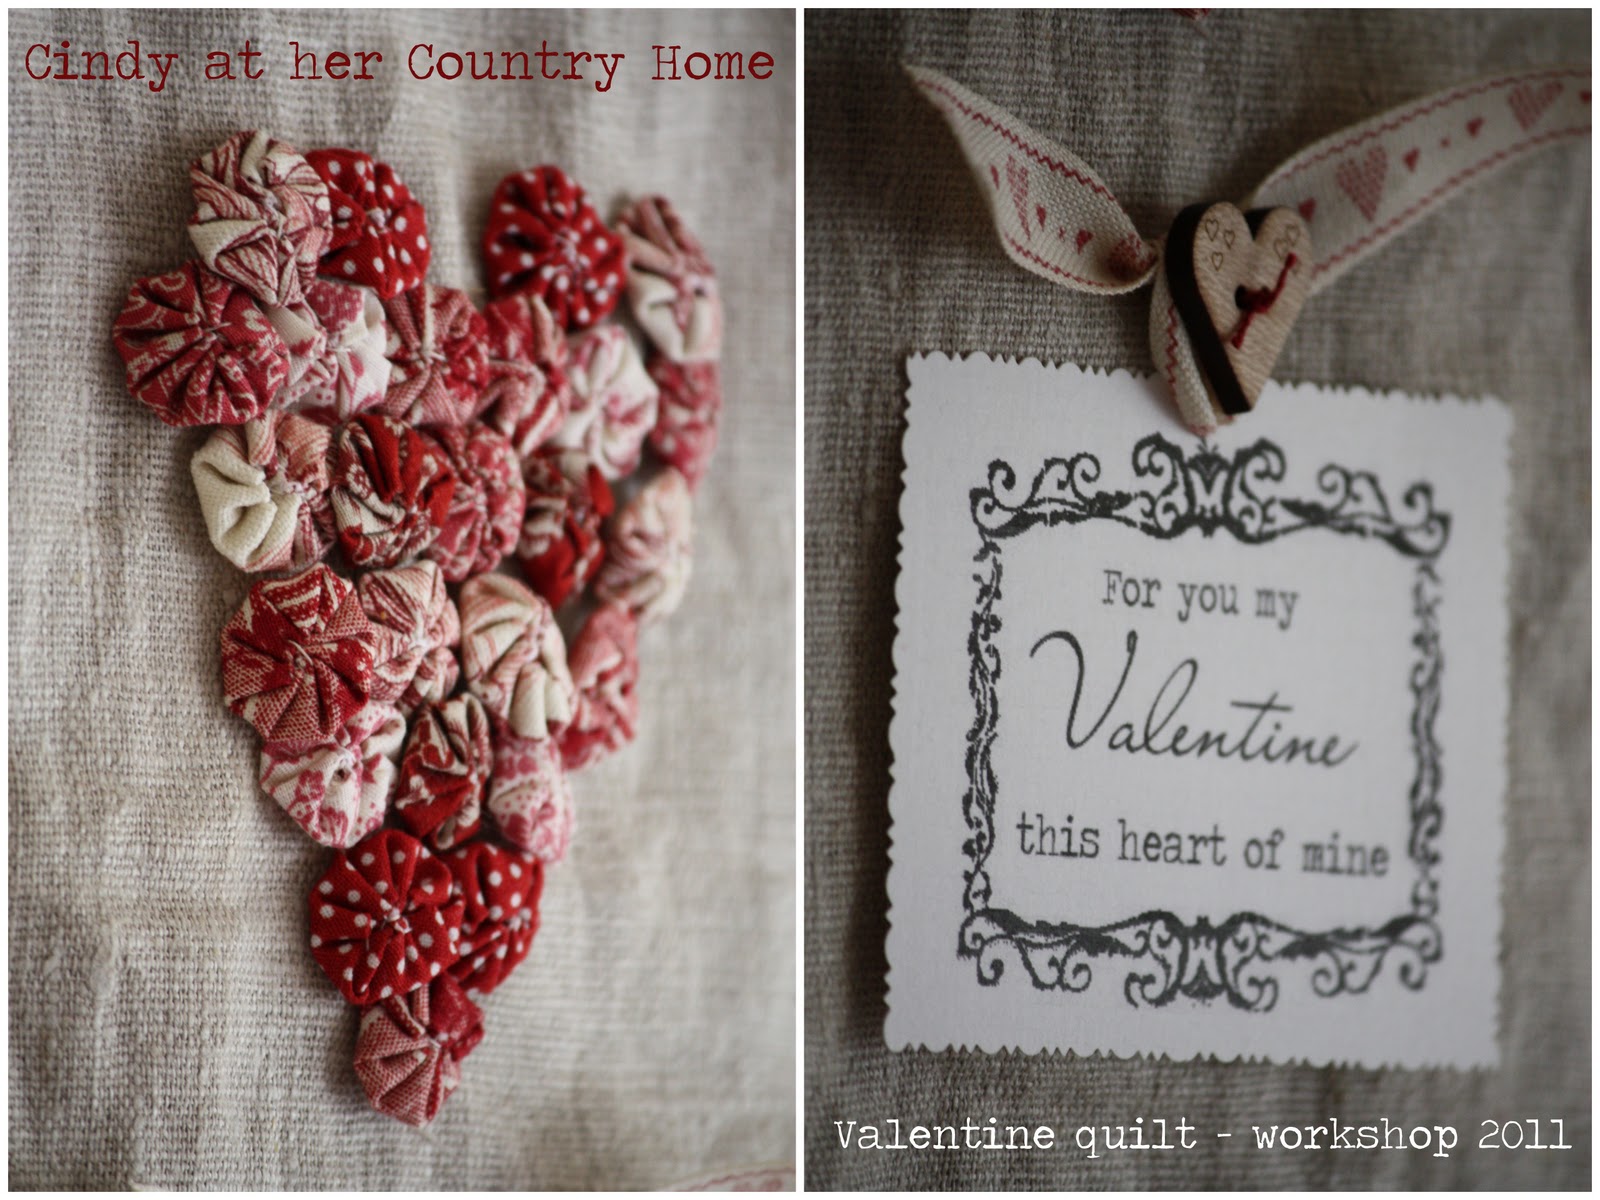 This heart of mine. Valentines Quilts. Country her.